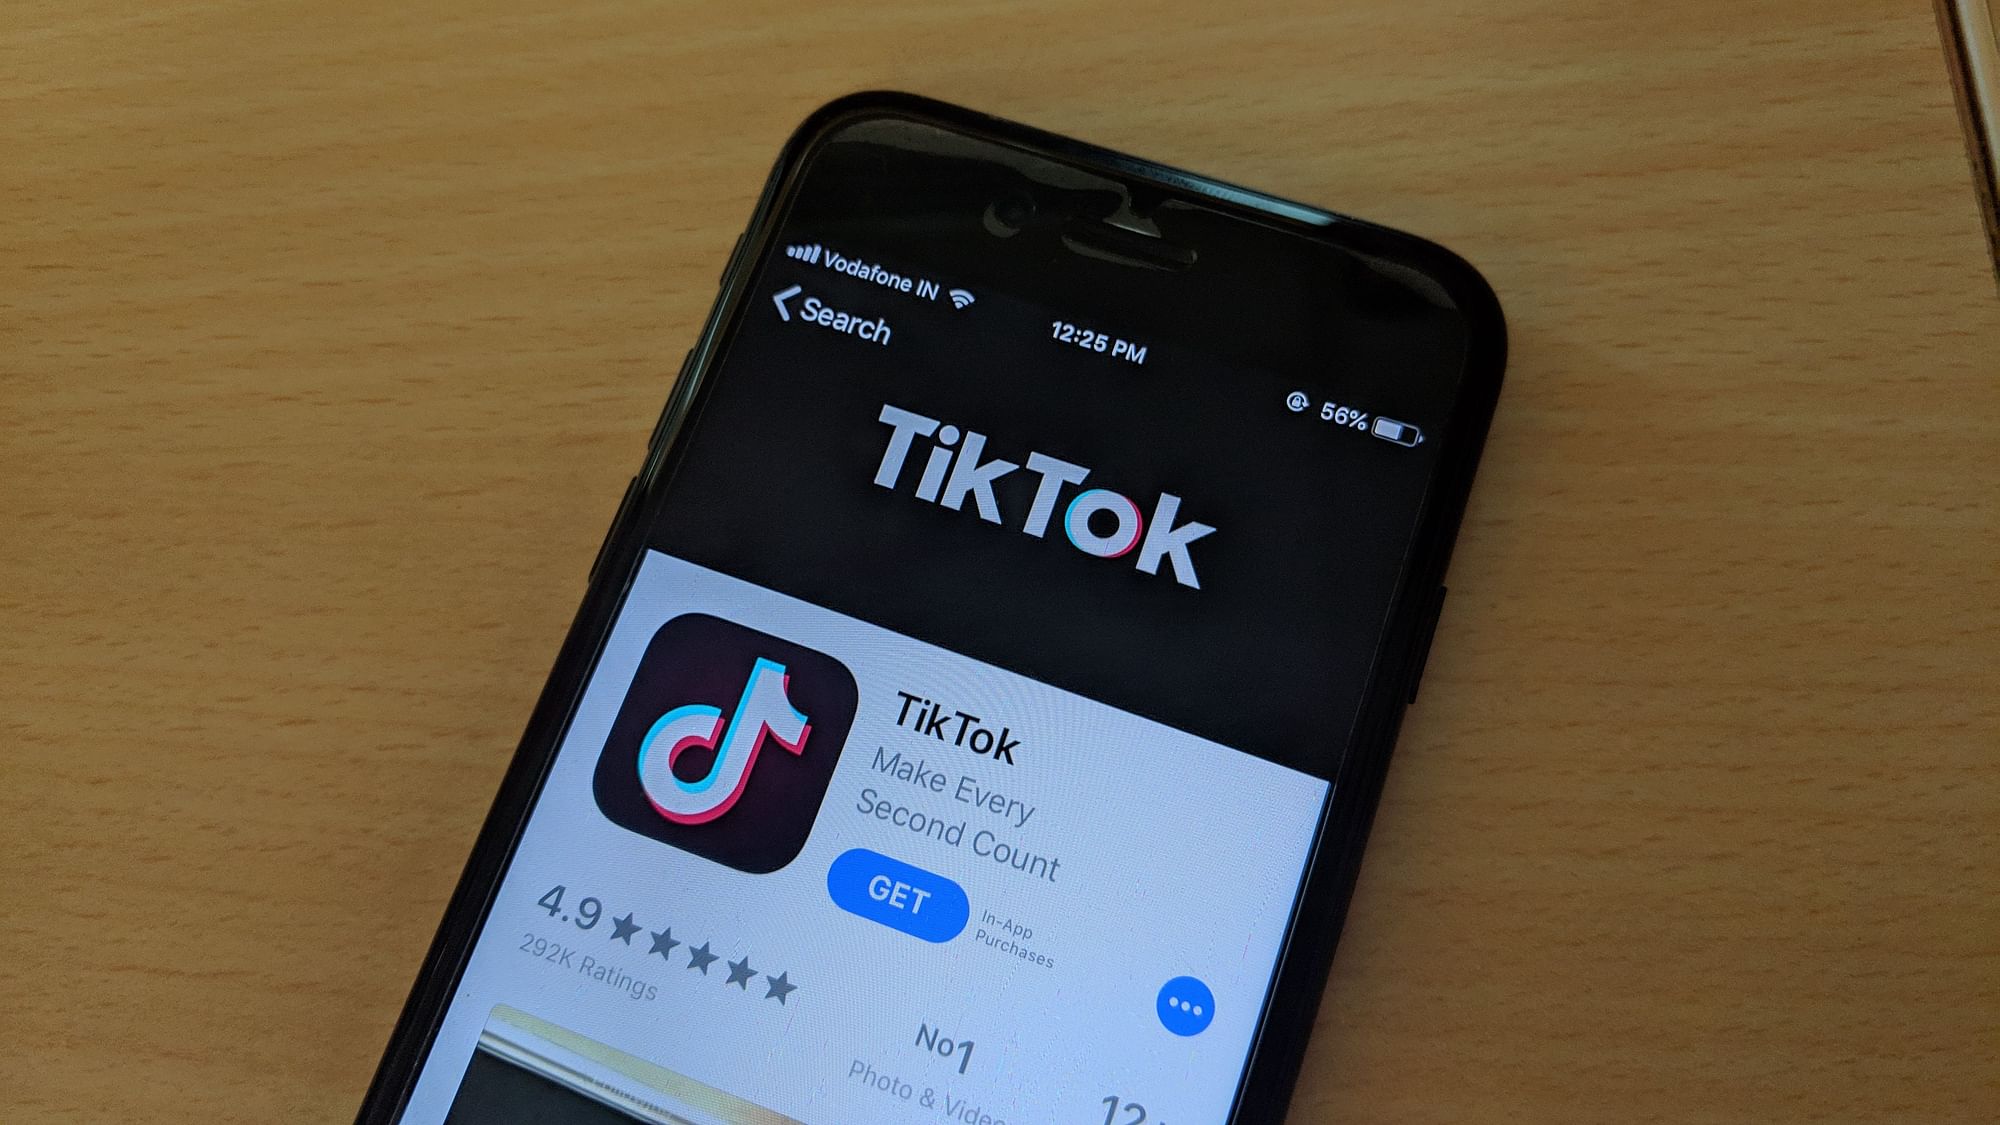 TikTok made its way back to Apple and Google app stores after its ban earlier this year.